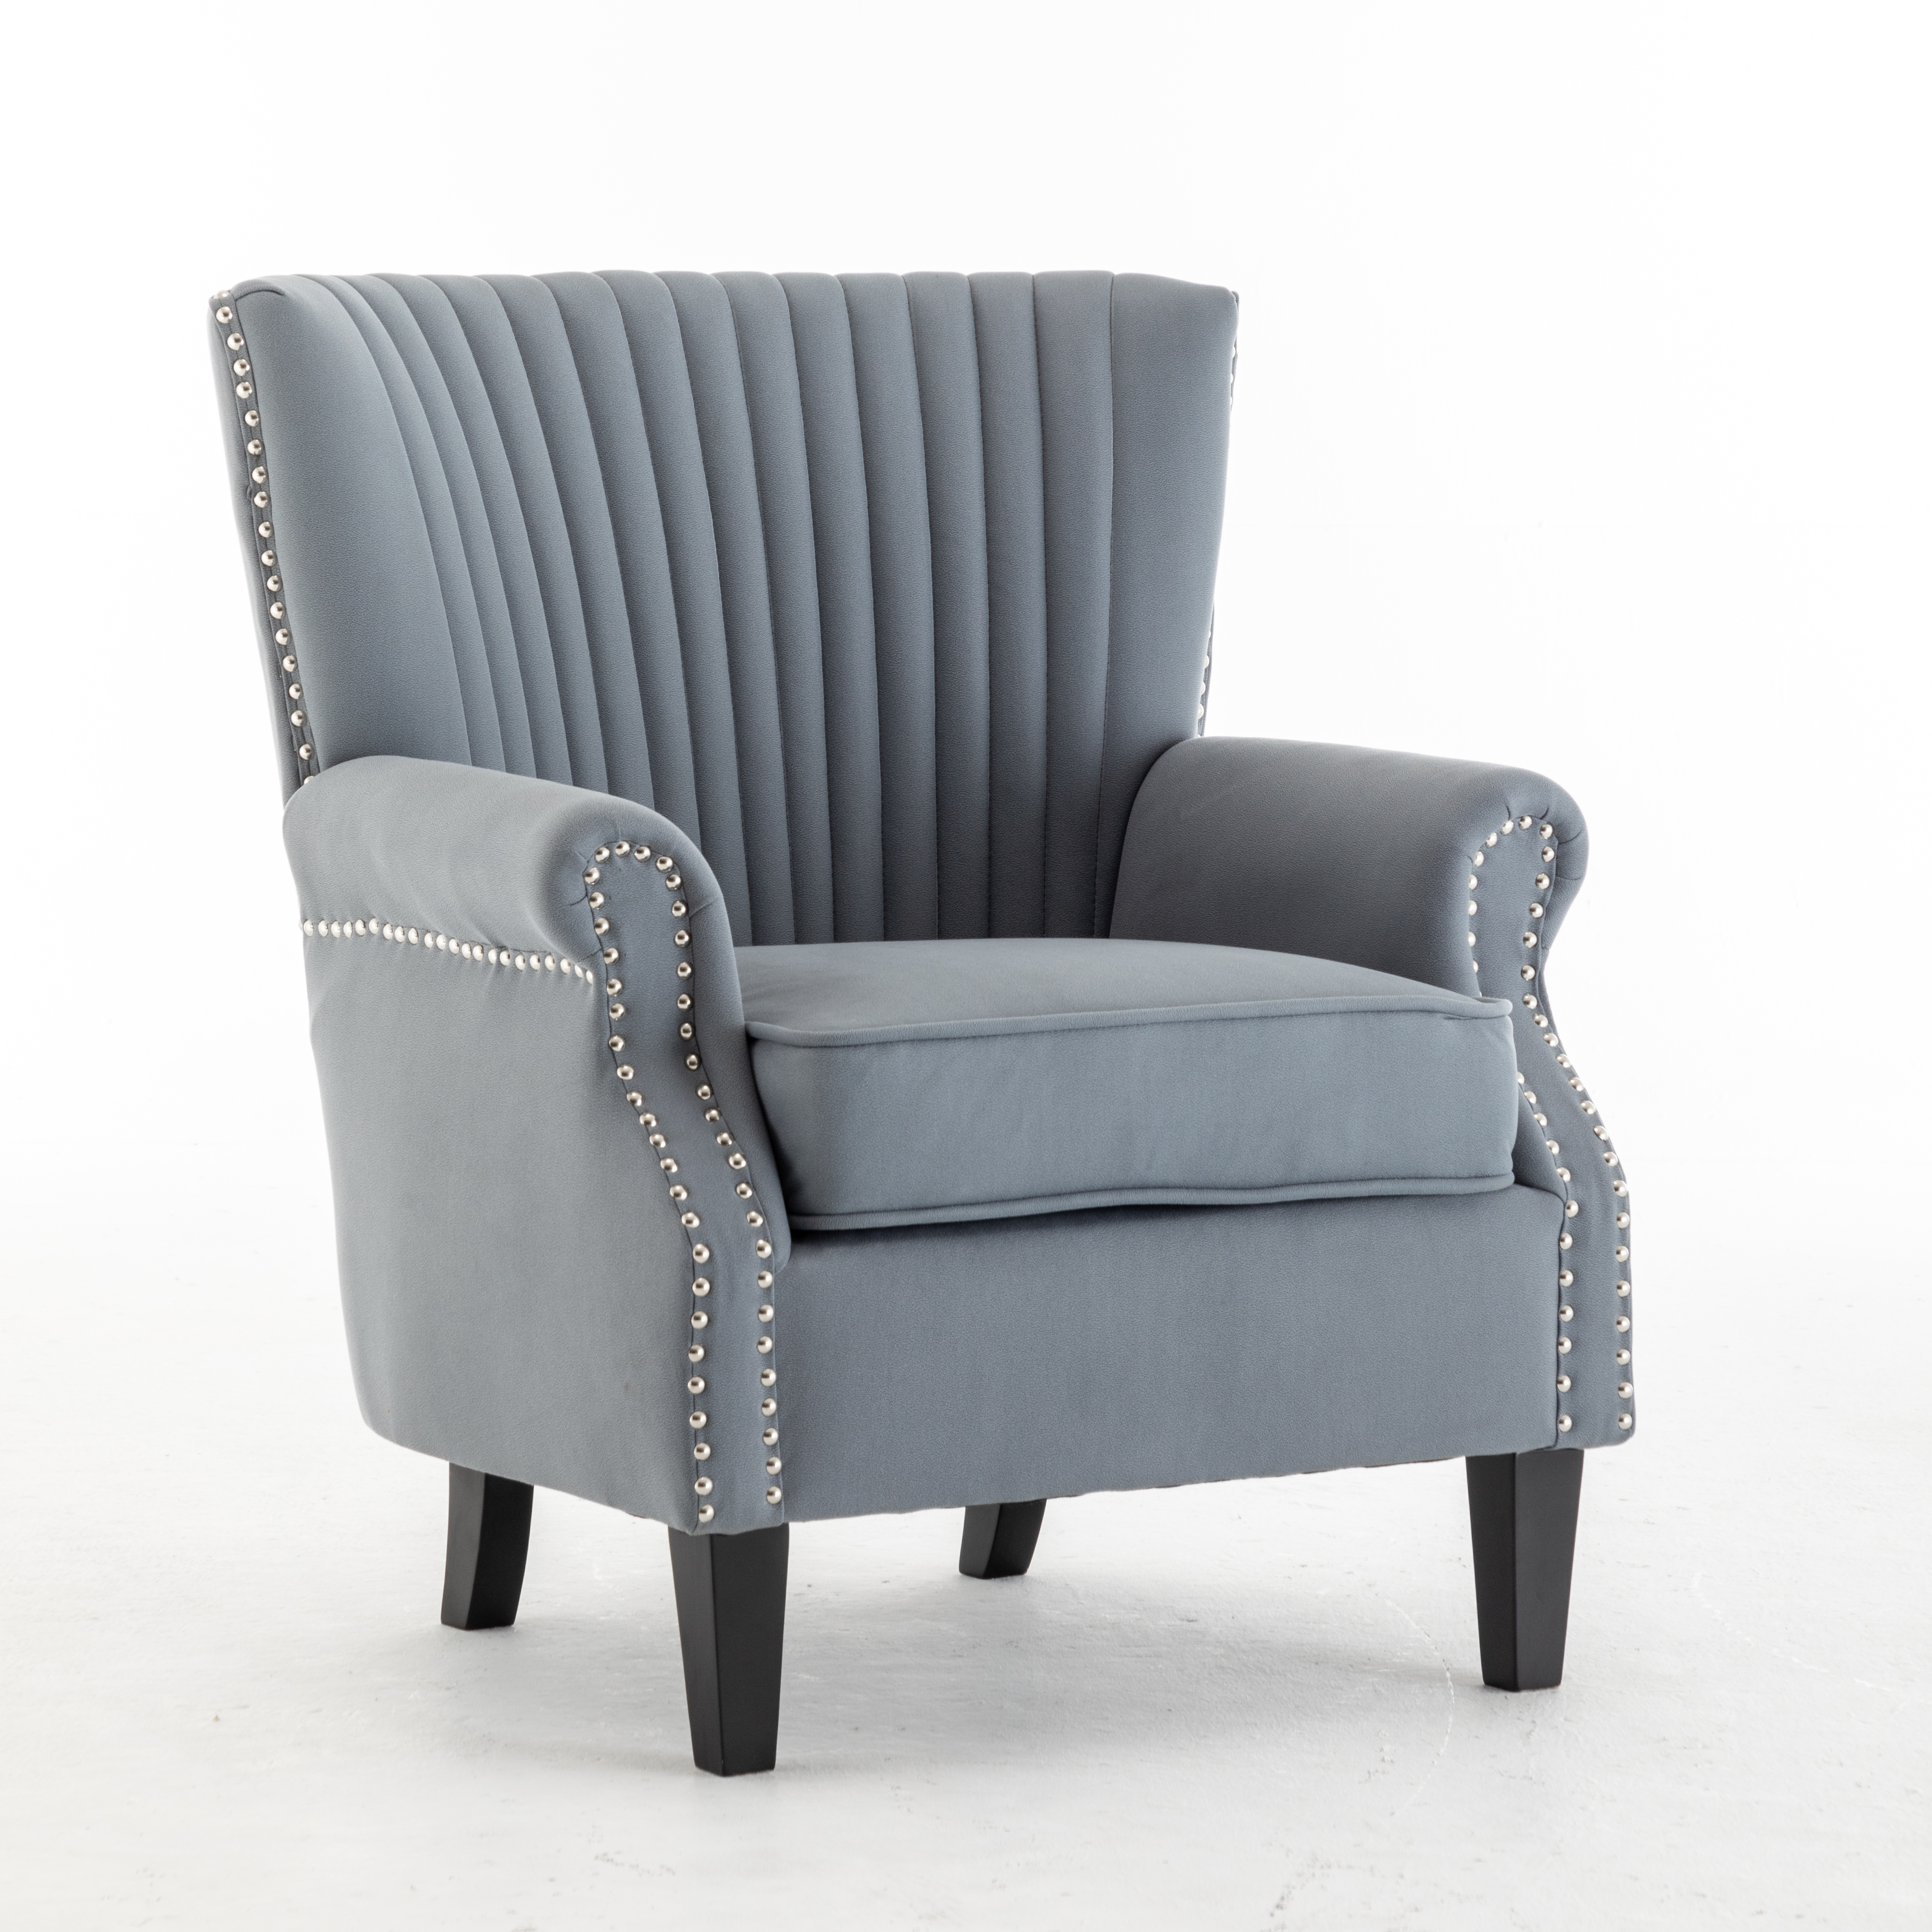 Accent Chair, Living Room Wingback Chair, Tufted Armchair with Padded Seat, Upholstered Accent Reading Chair-Boyel Living